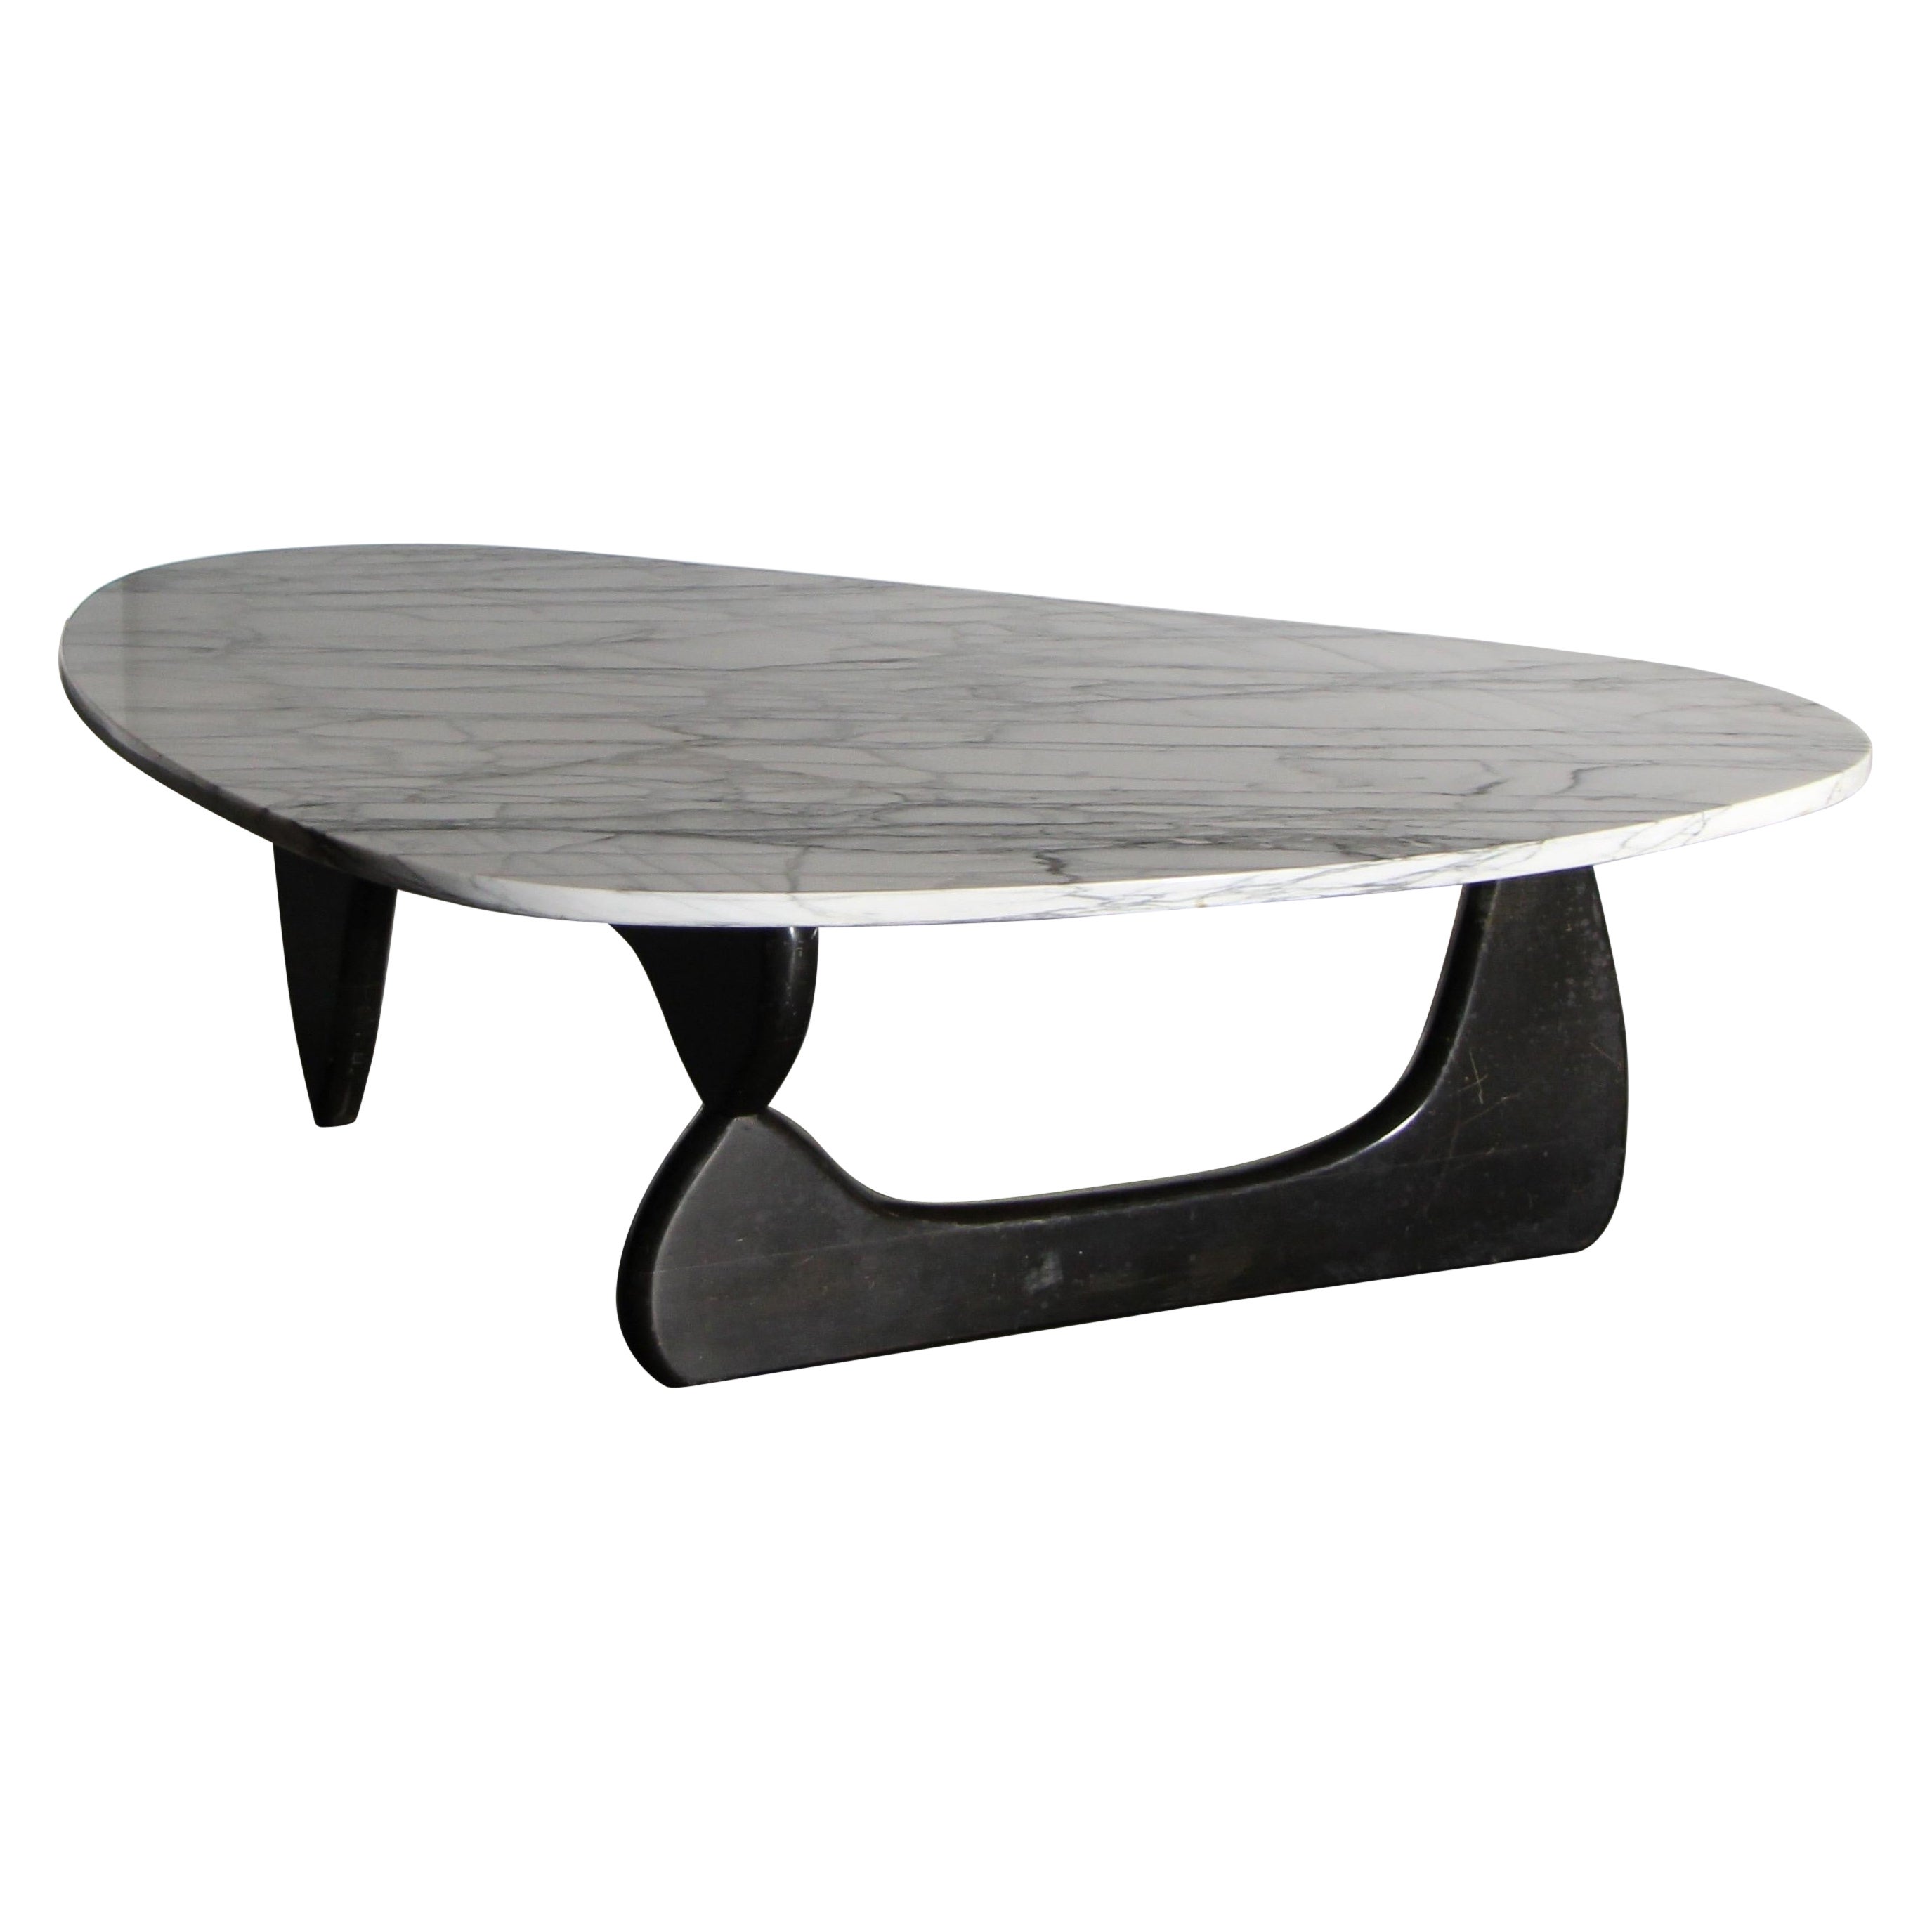 Early 1950s "IN-50" Coffee Table by Isamu Noguchi with Custom Carrara Marble Top